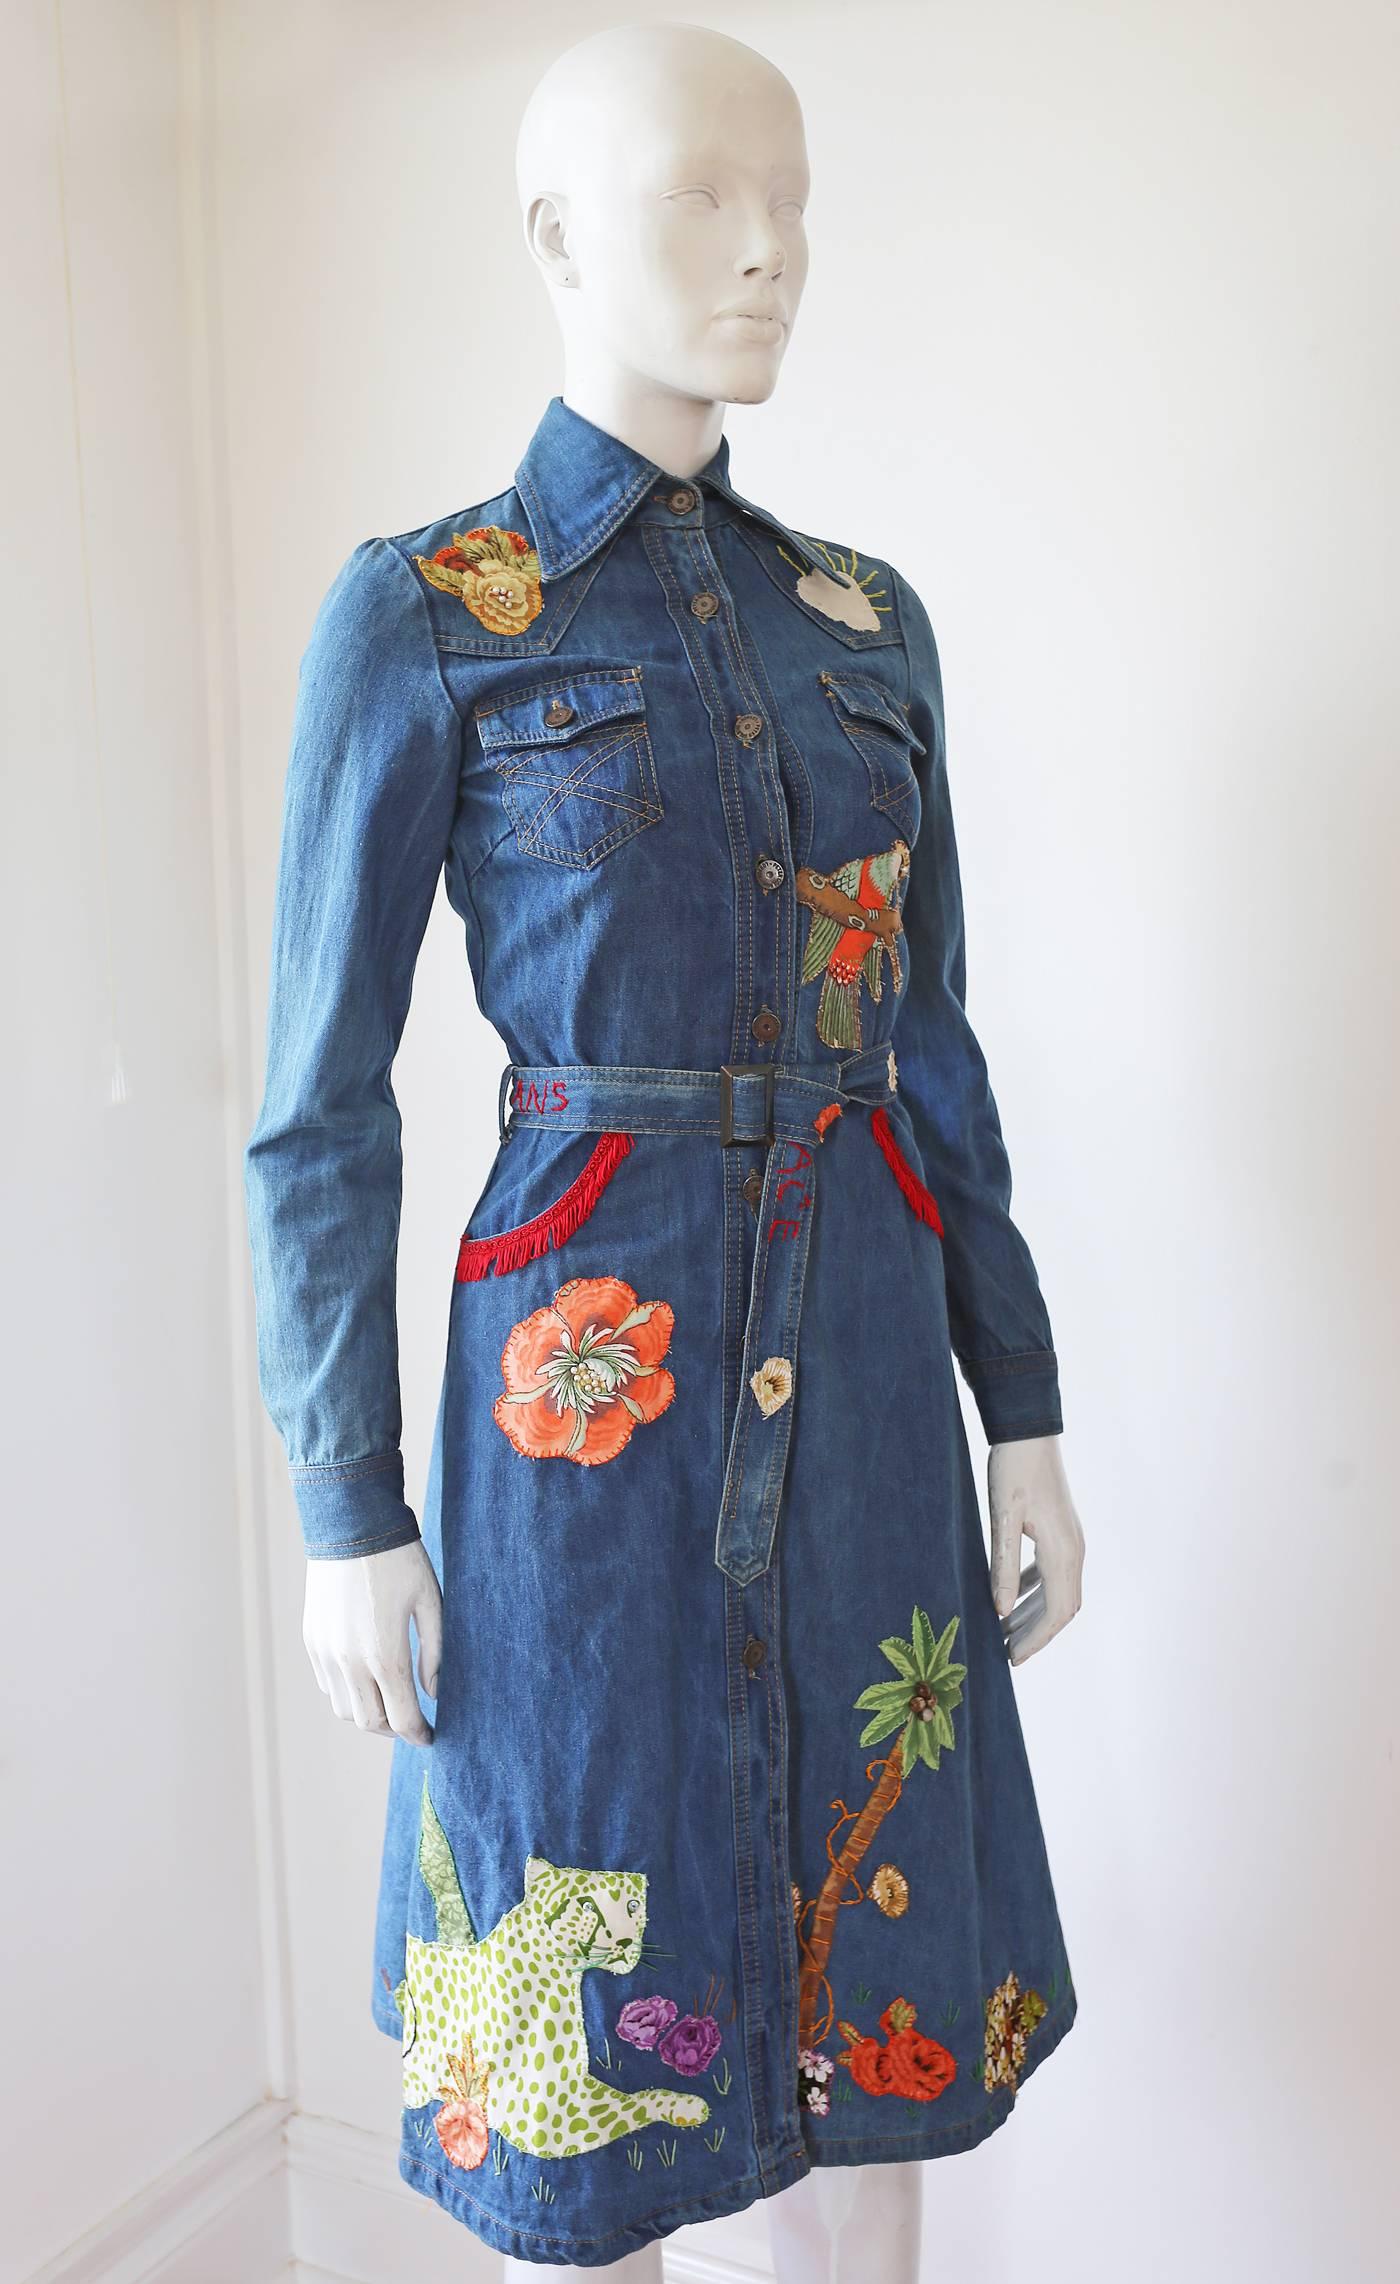 Extremely rare and collectible Peter Golding denim dress from the ACE store on London's King's Road Chelsea in 1974. The dress features, western style fringed pockets, hand sewn patchwork jungle themed imagery all over and embroidered 'ACE JUNGLE